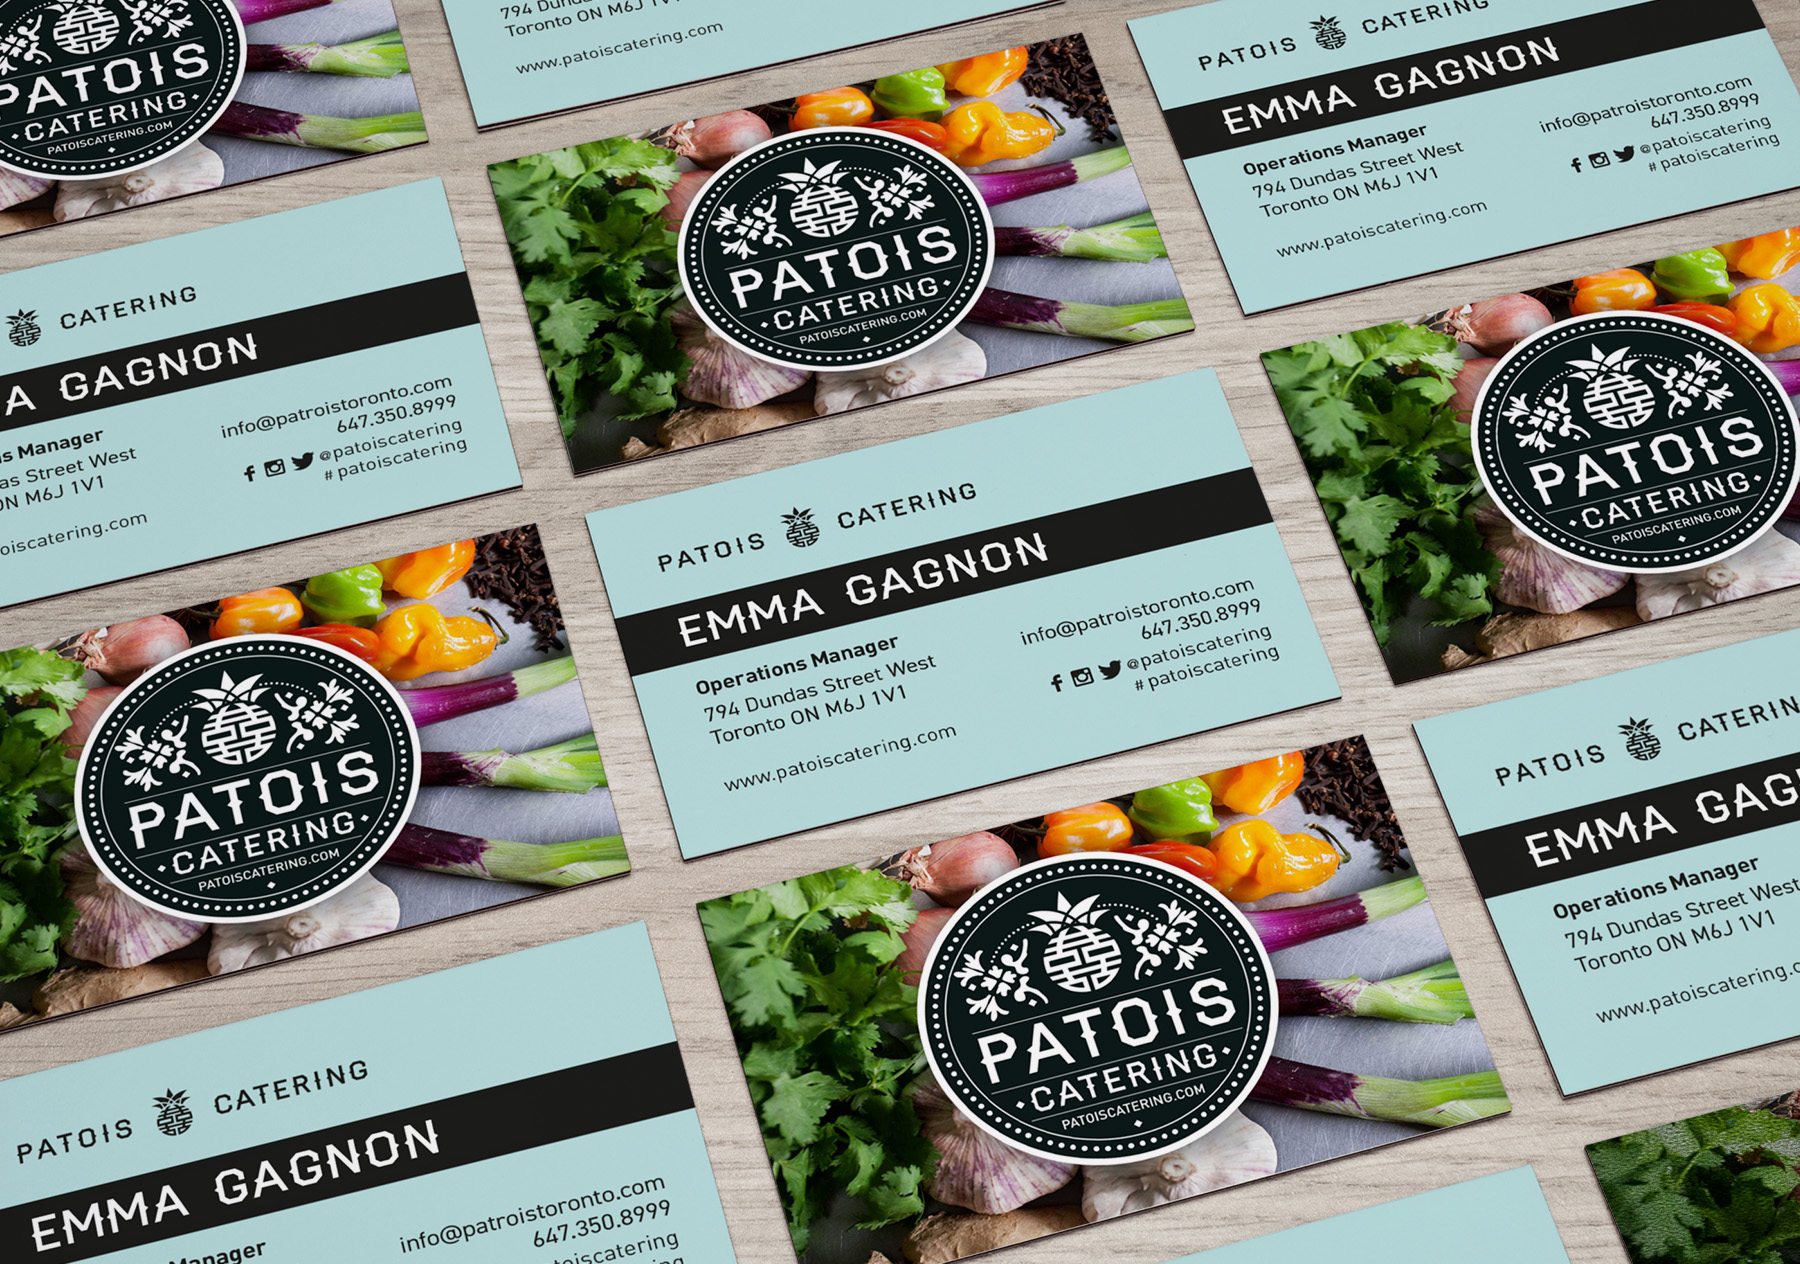 Patois Catering business cards. Designed by Elsie Lam.